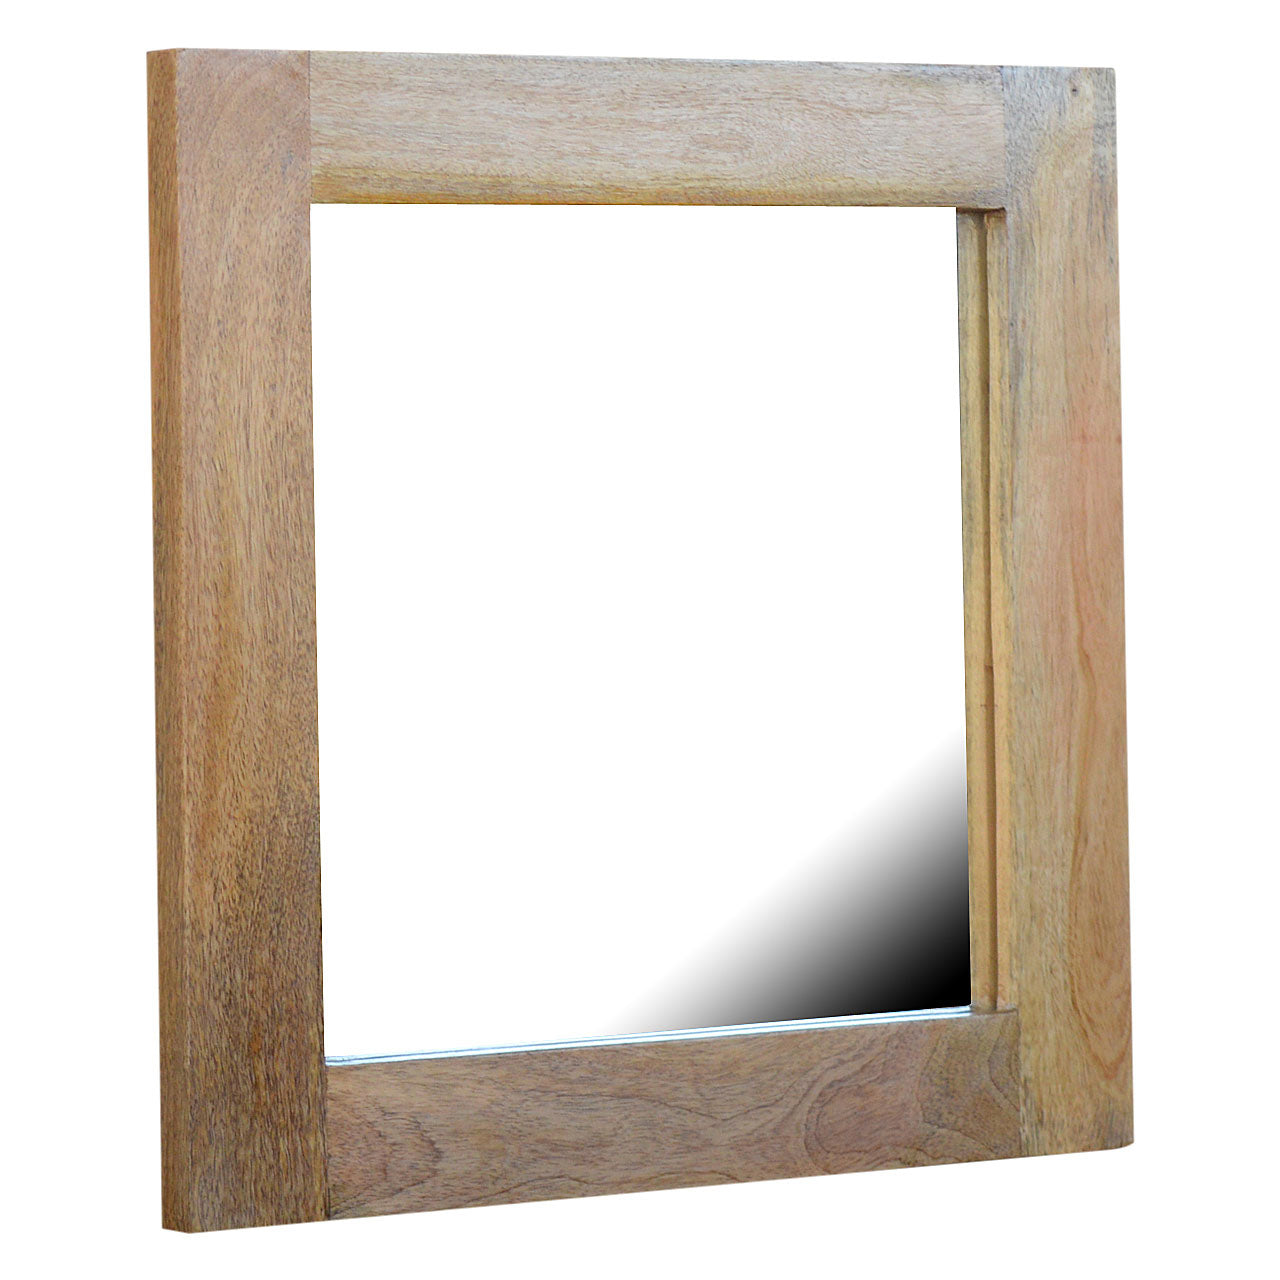 Handmade Mango Wood Square Wooden Frame With Mirror